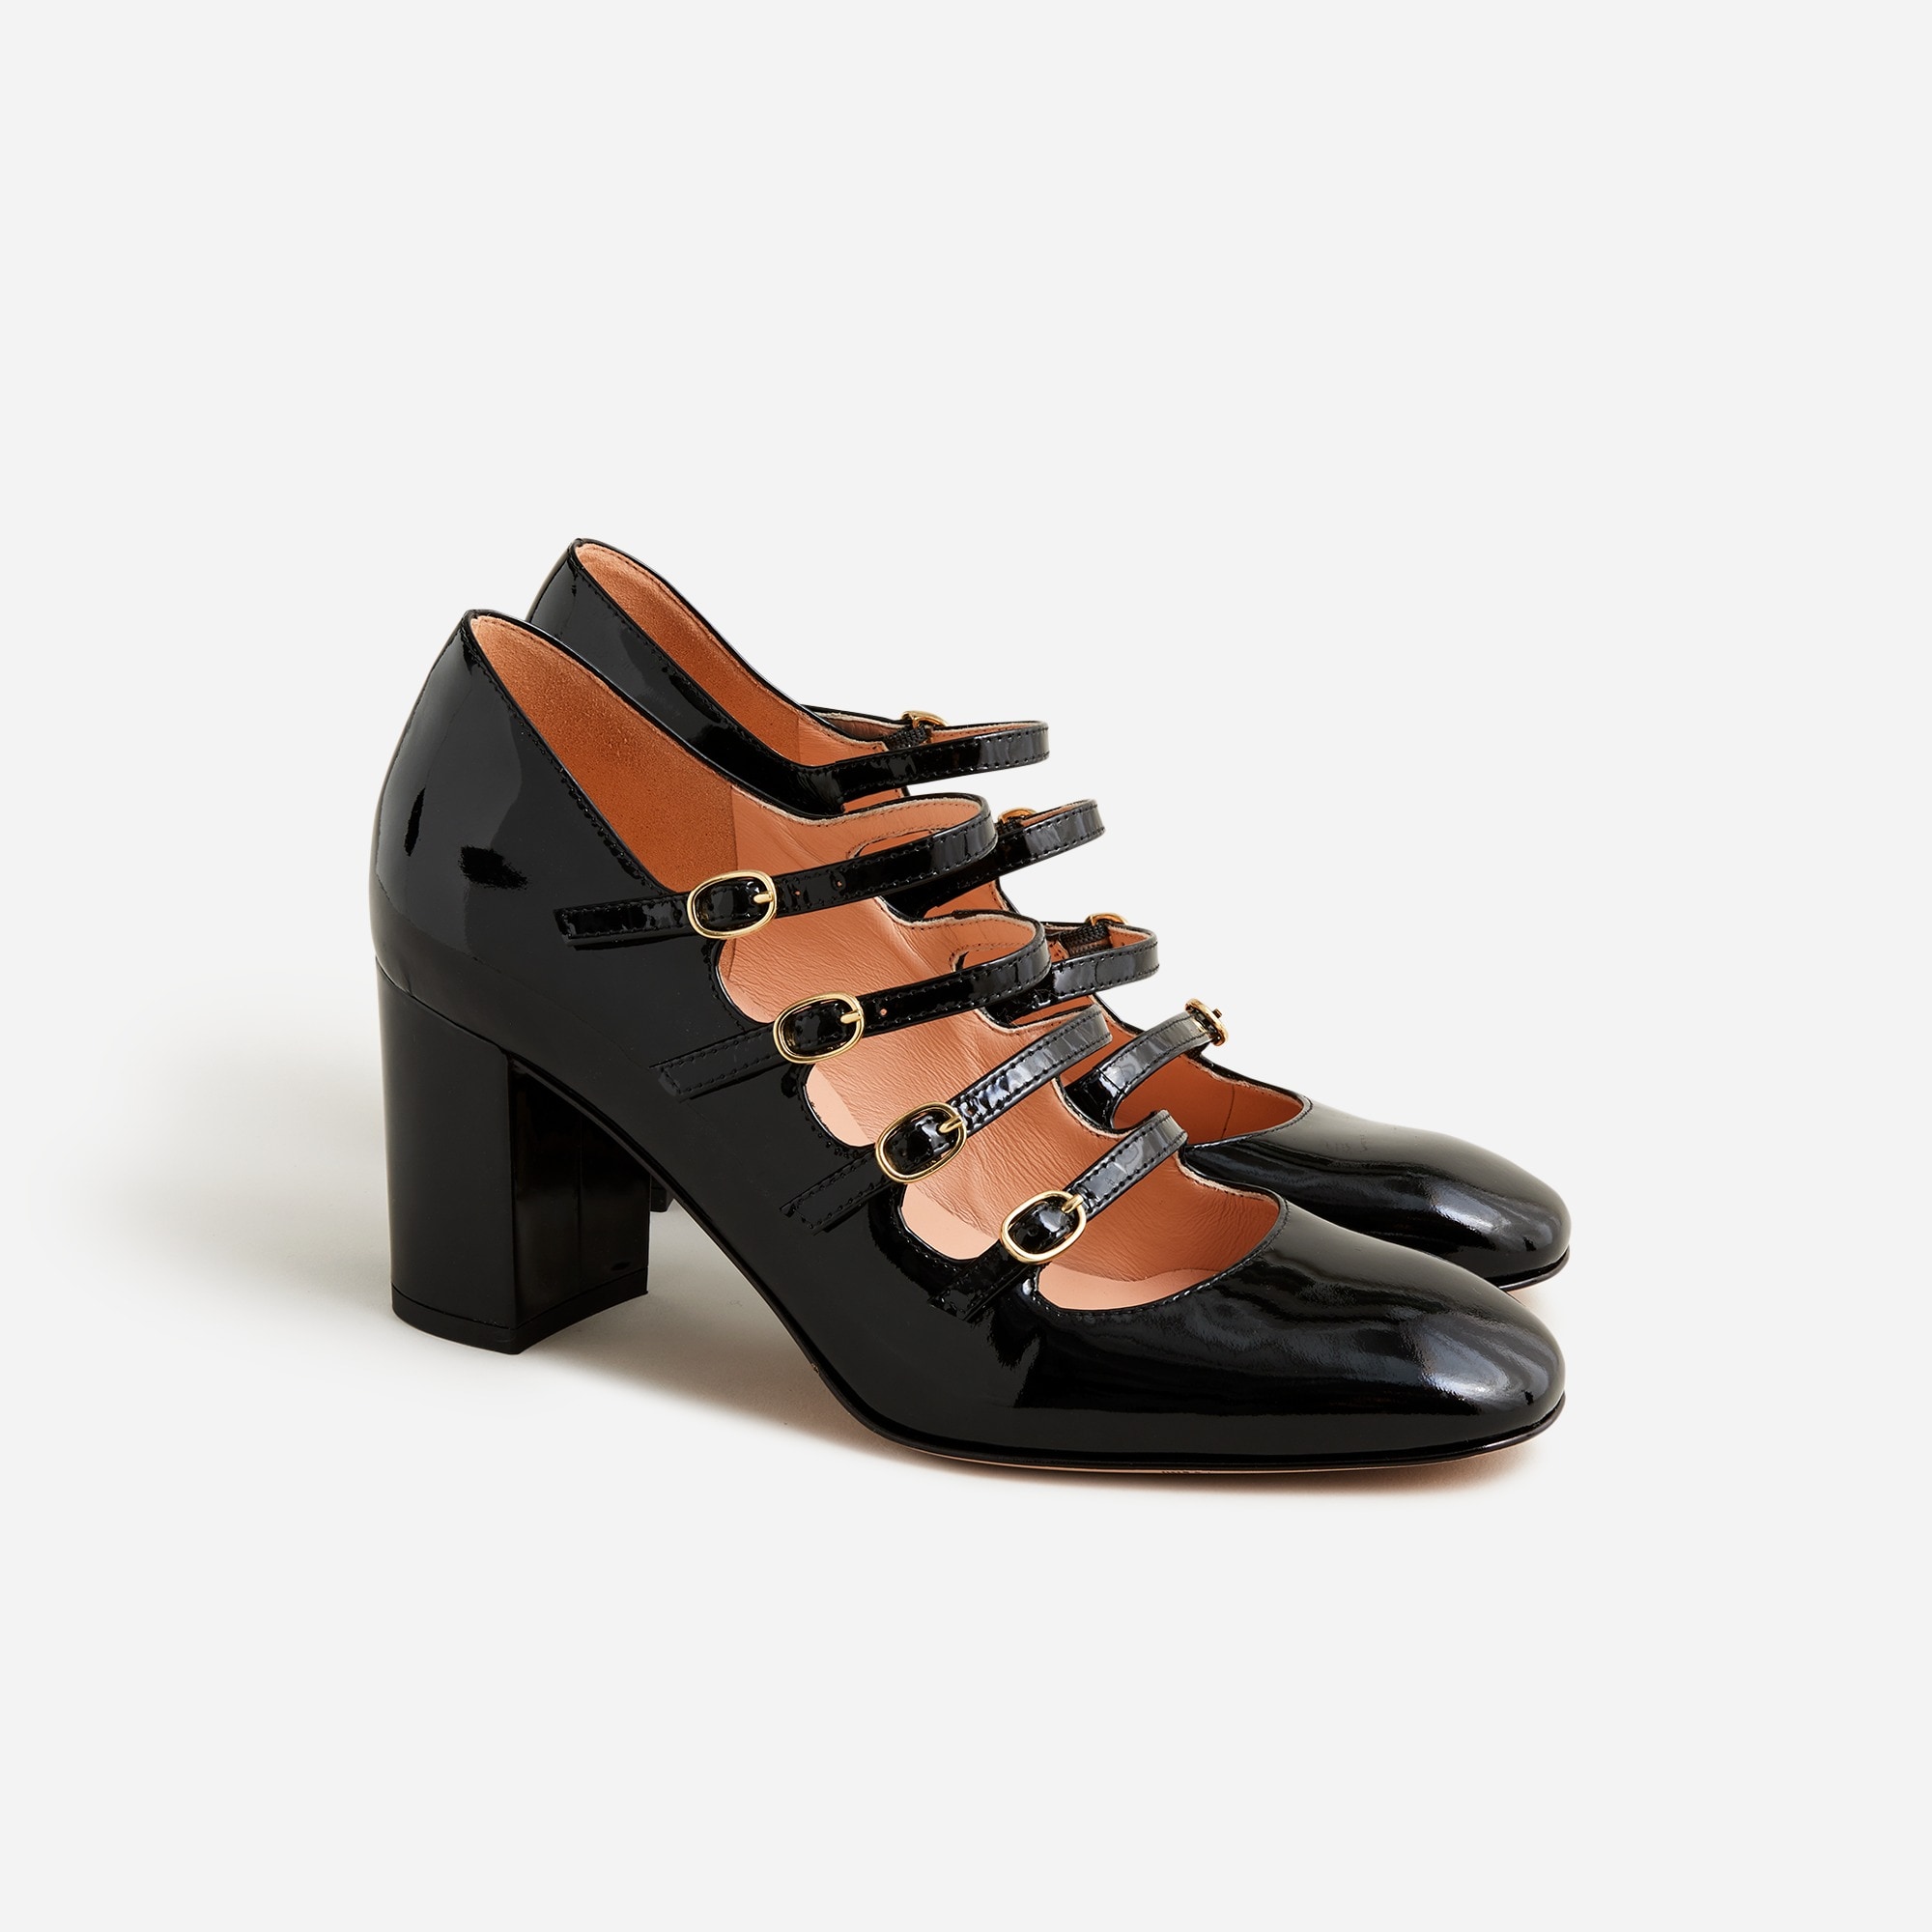 womens Maisie multistrap heels in patent leather